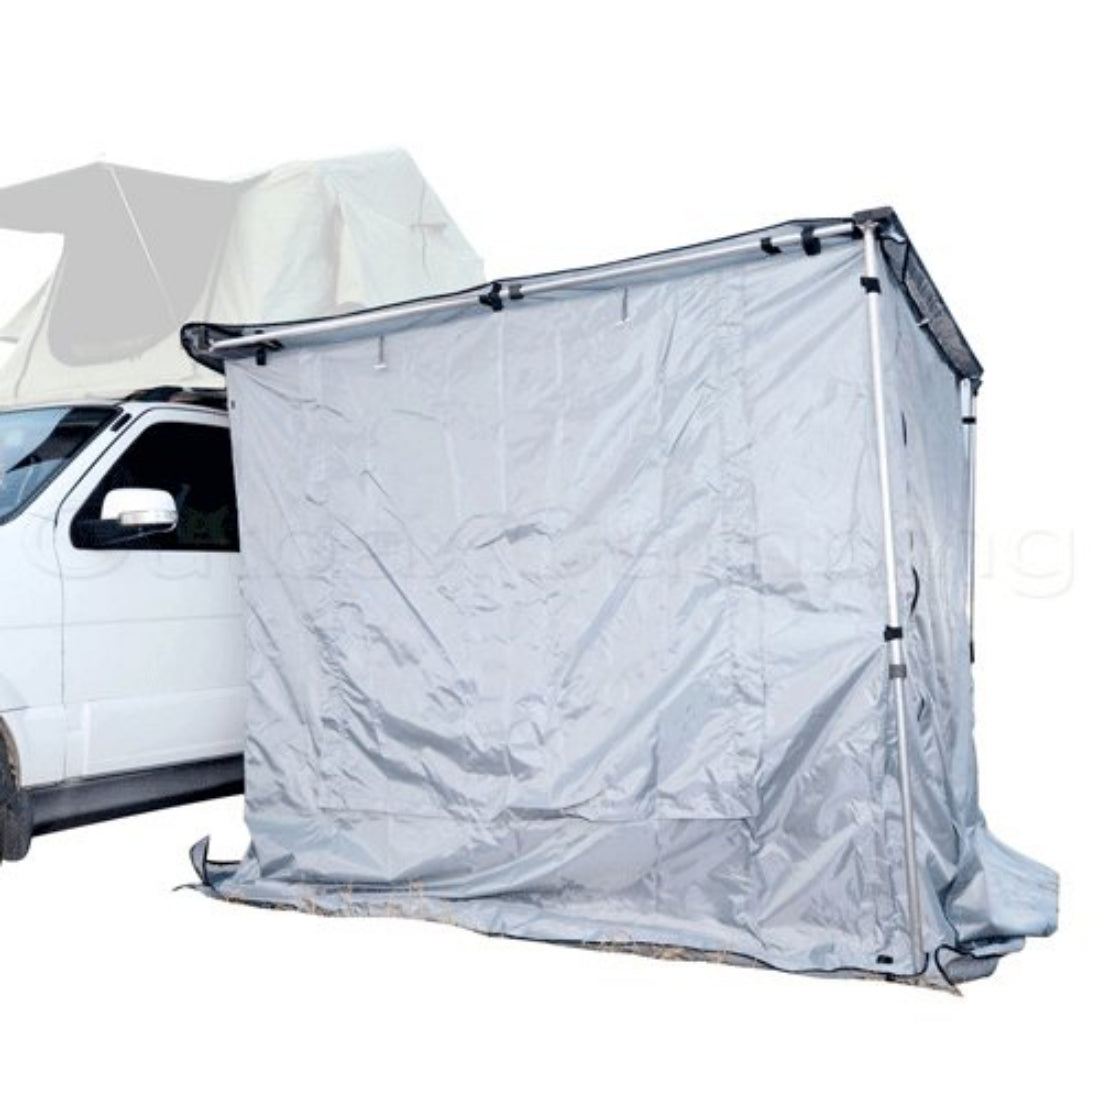 3m x 3m 4WD Pull Out Awning Room